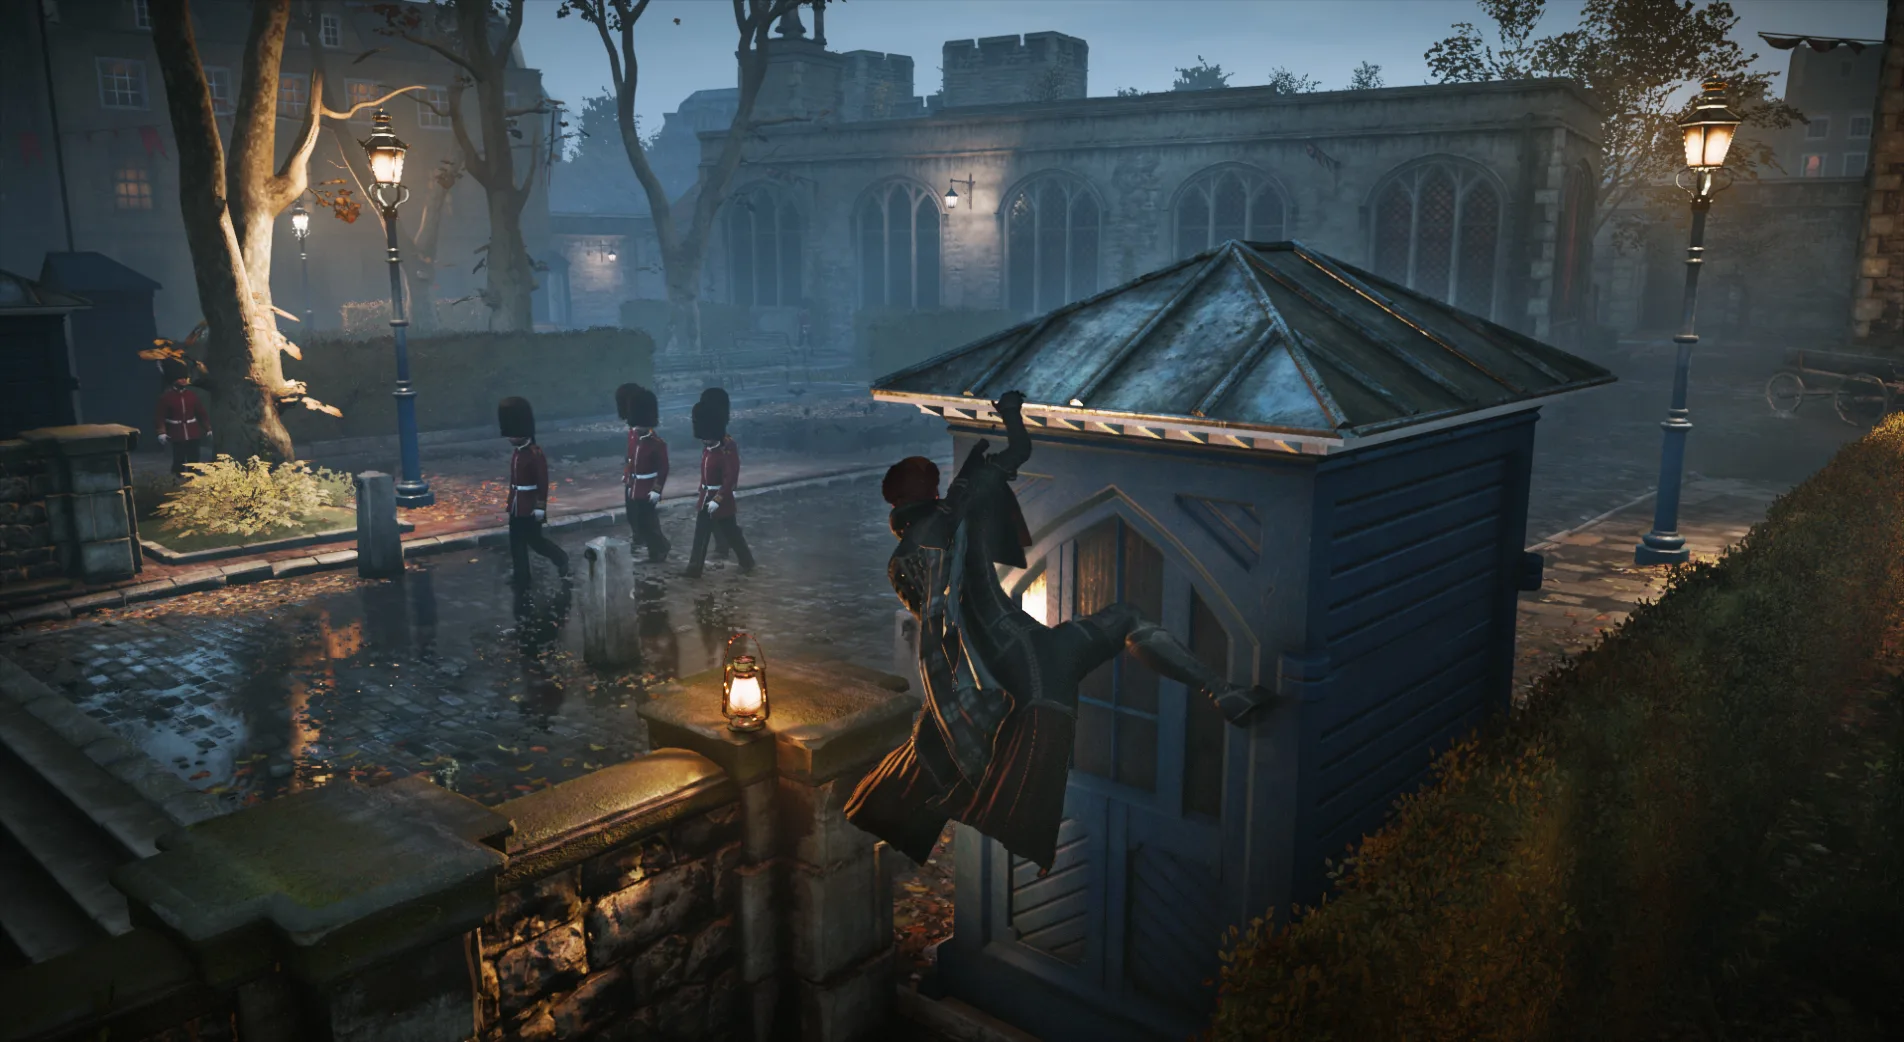 Assassin's Creed Syndicate Torrent